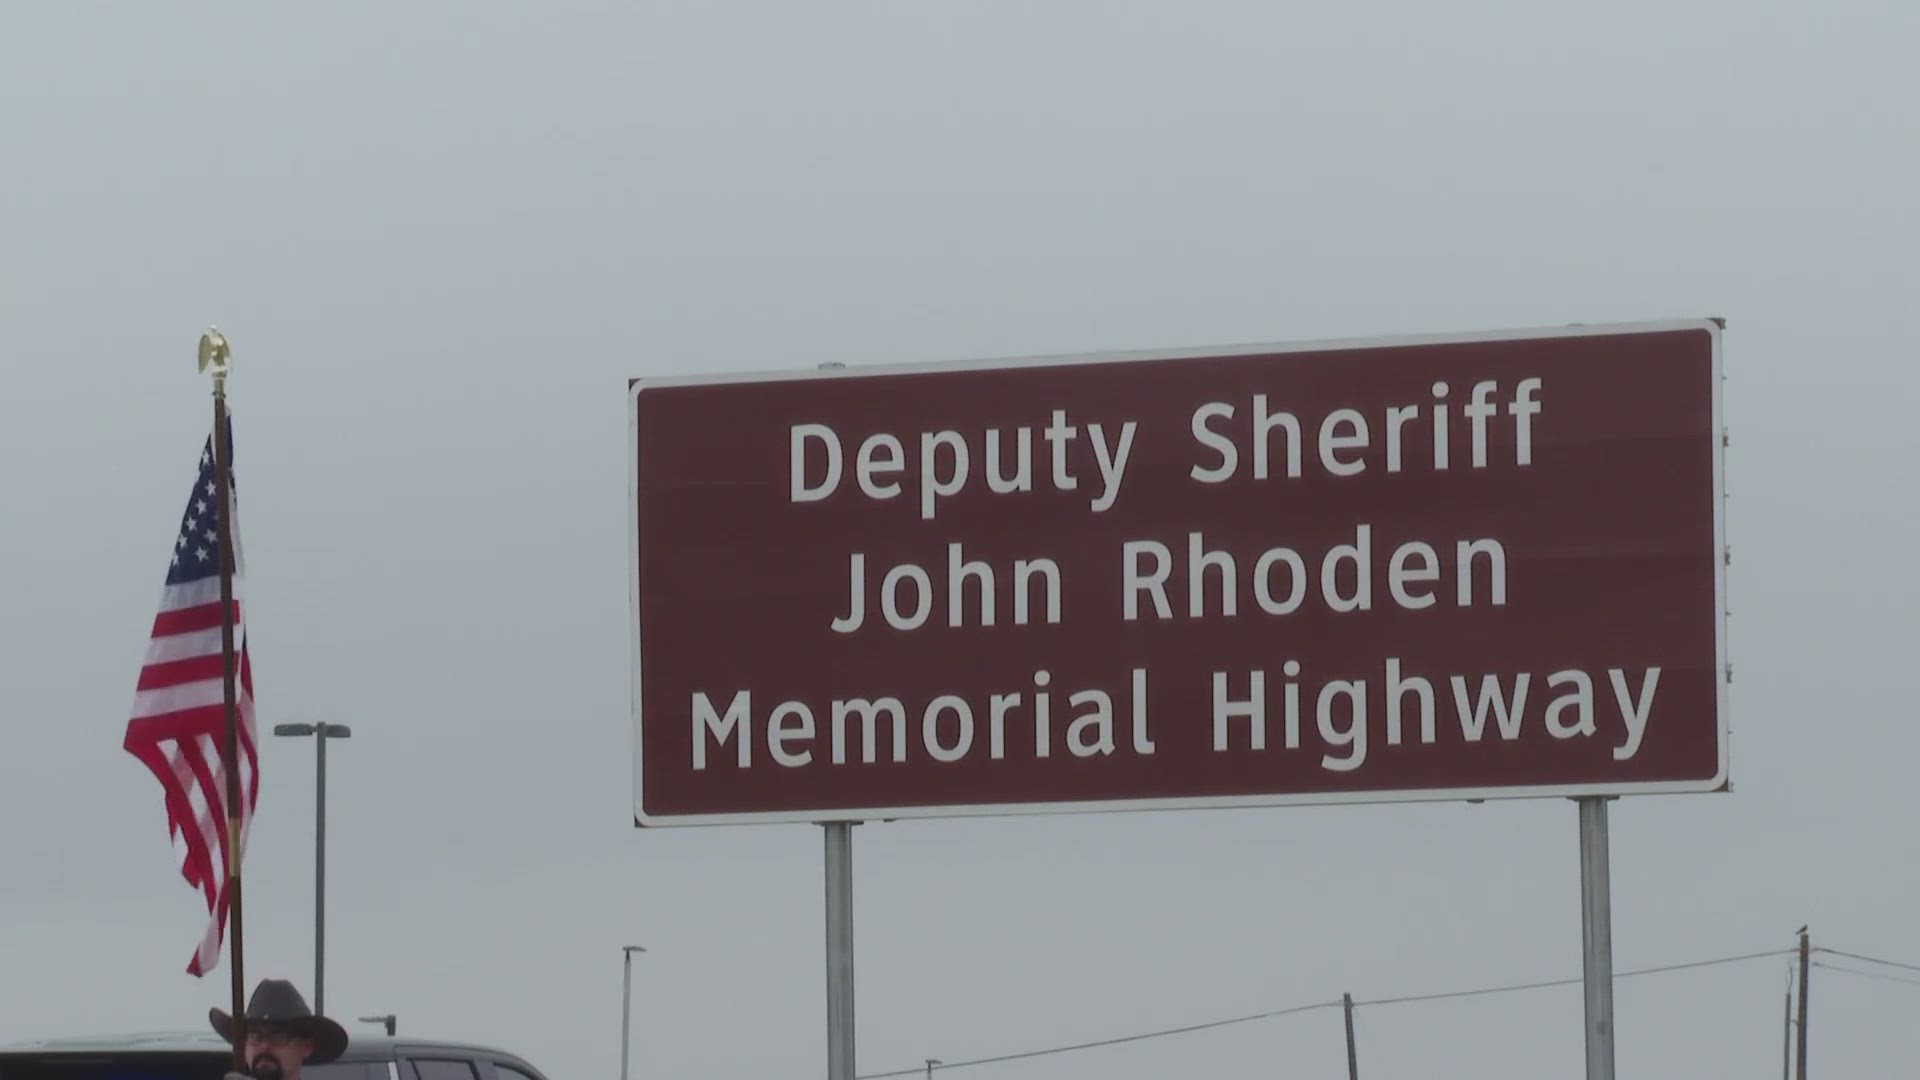 Deputy Sheriff John Rhoden Memorial Highway was unveiled three years after Rhoden died putting down spike strips during a police chase.